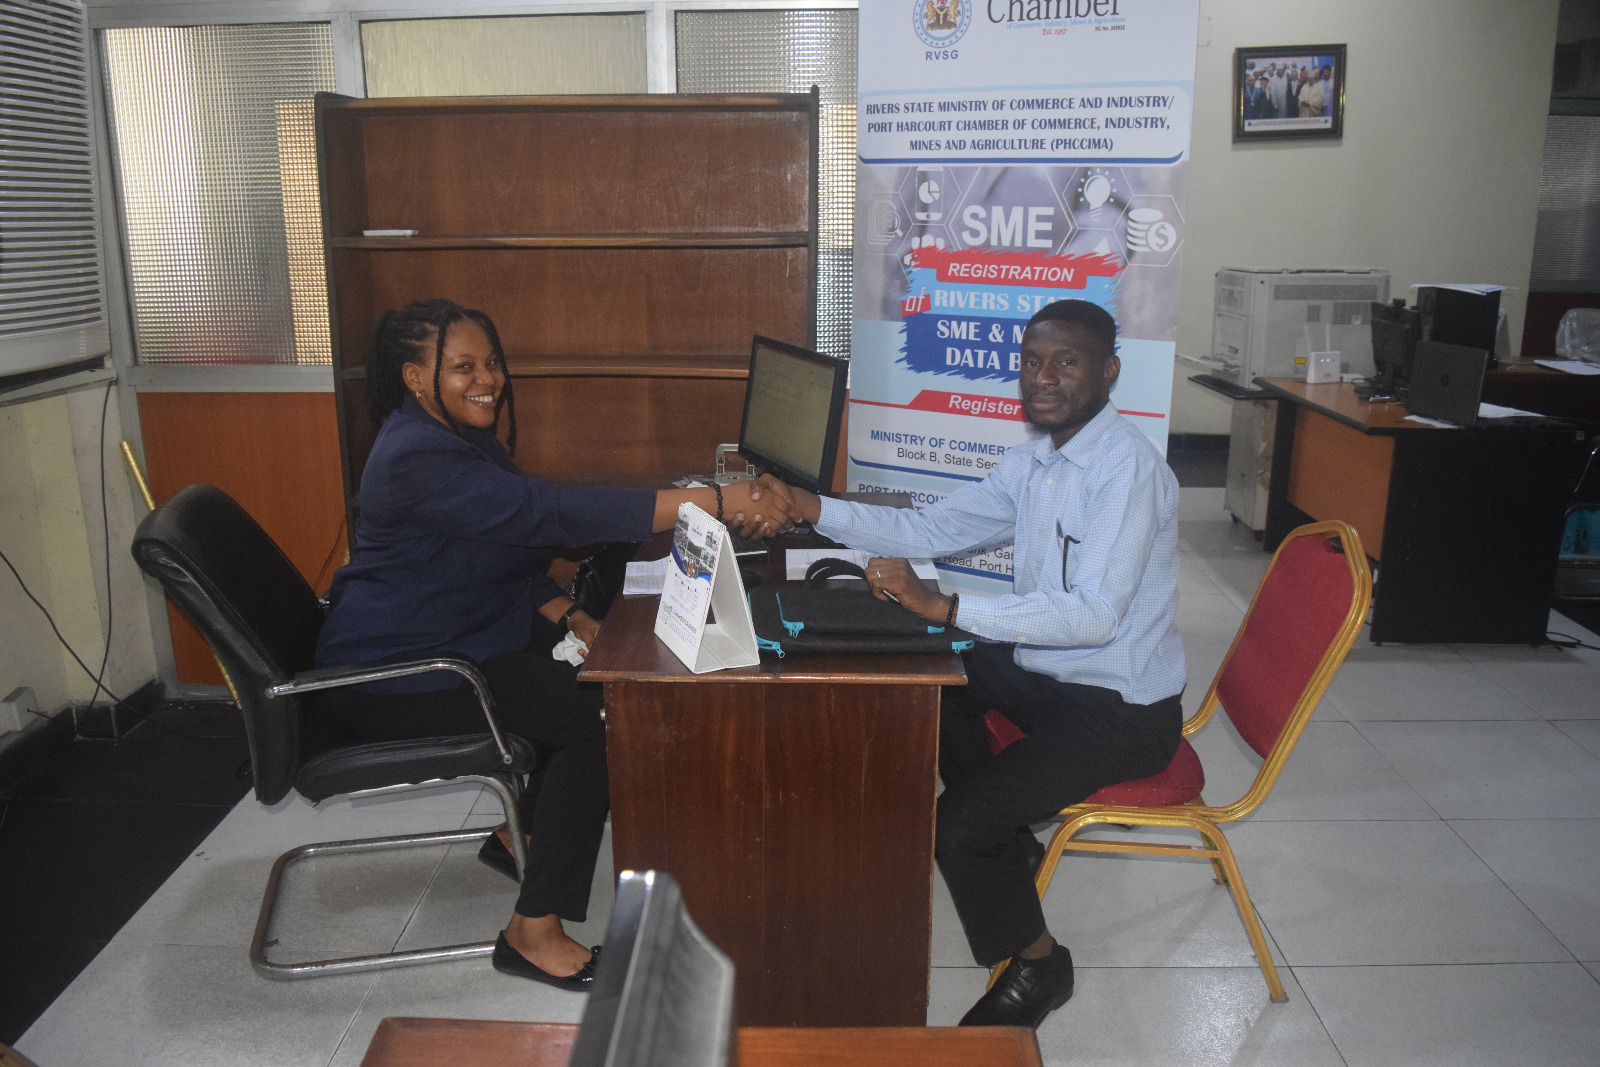 You are currently viewing PHCCIMA SECRETARIAT COMMENCES RSG/PHCCIMA MSMEs & SMEs DATABASE REGISTRATION